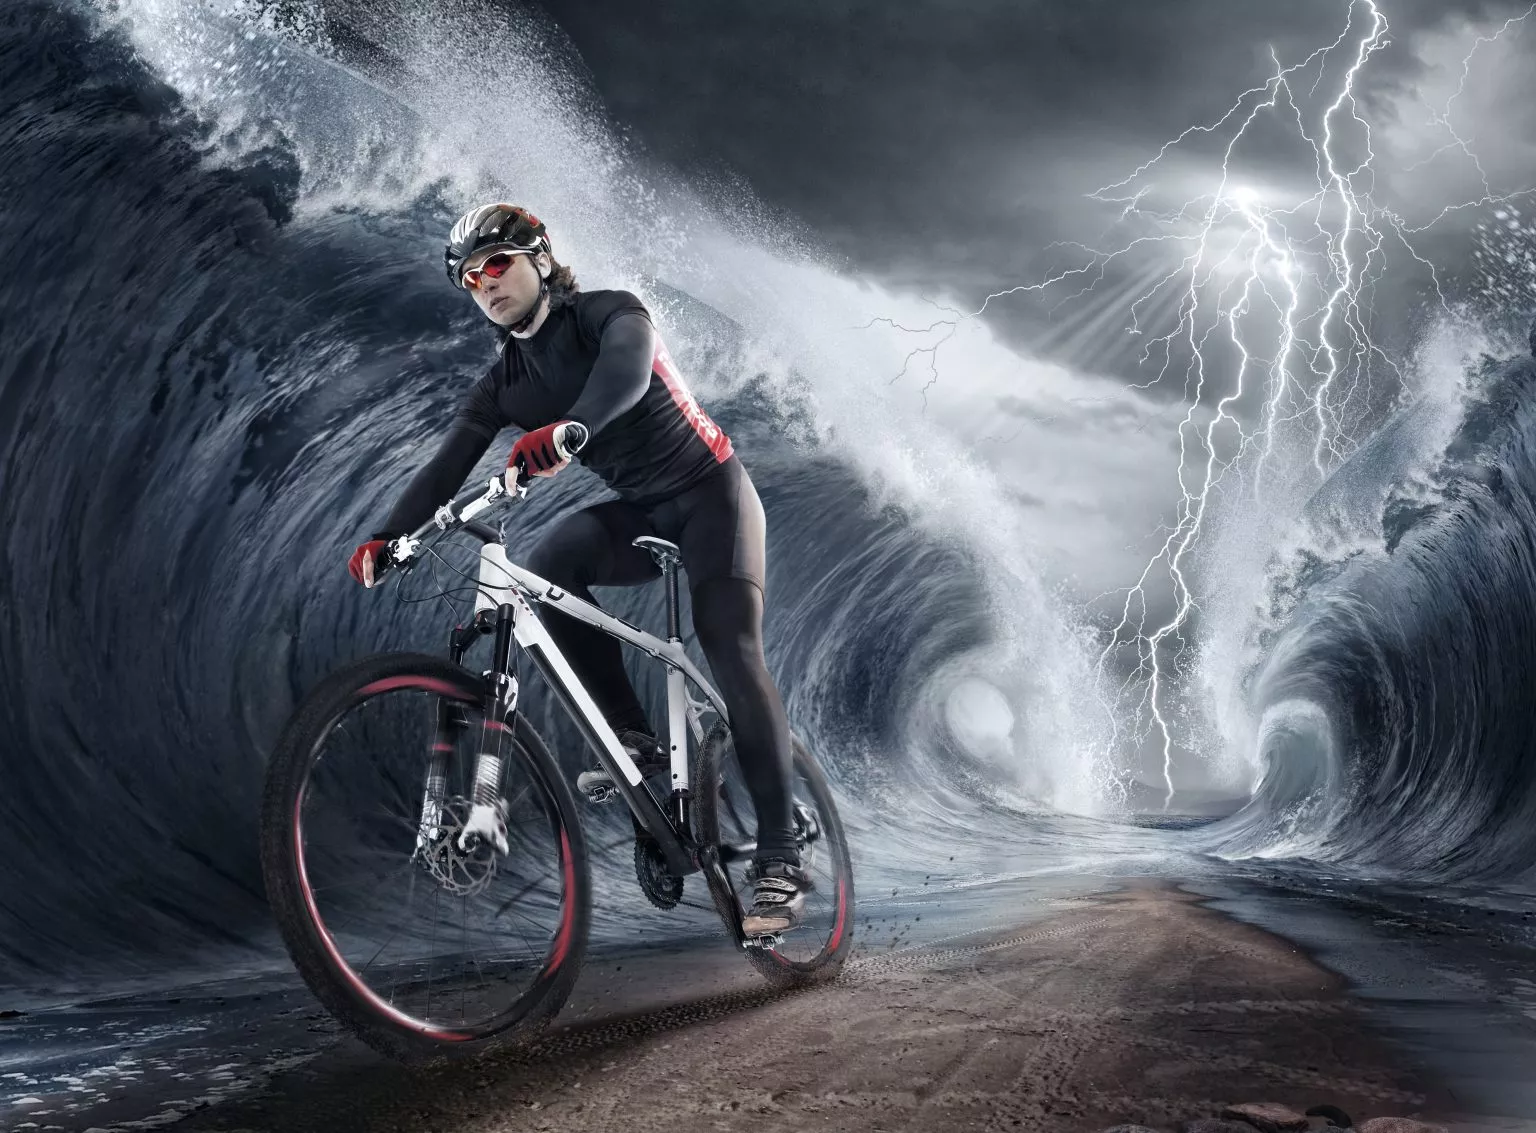 Do you ride in thunderstorms?